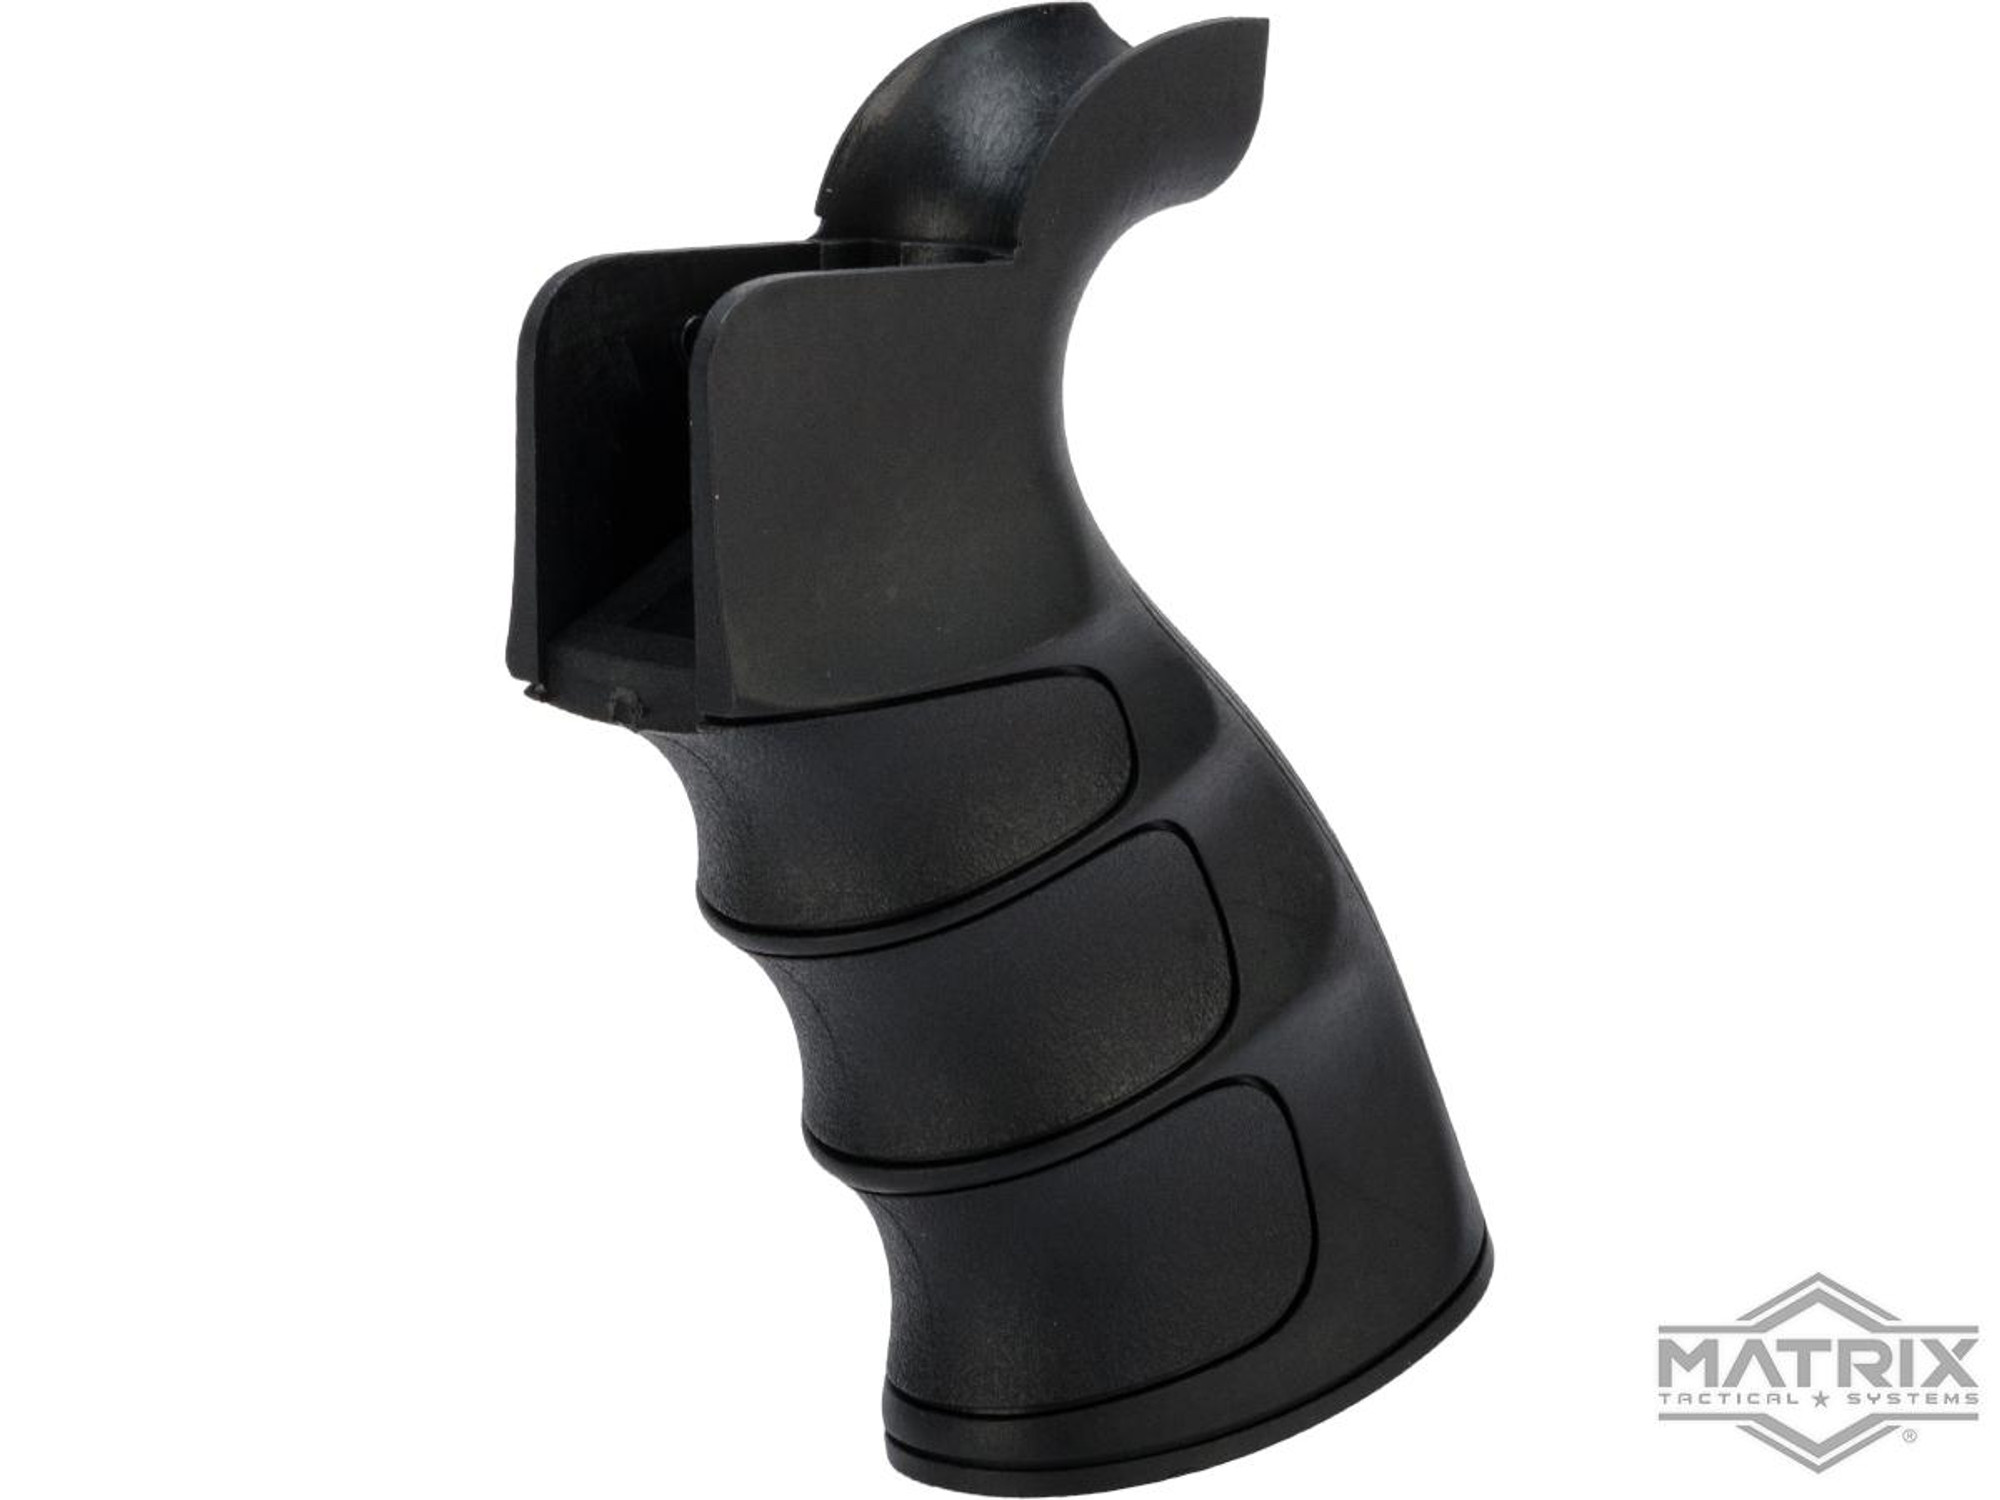 Matrix G27 Grooved Motor Grip for M16 / M4 Series Airsoft AEG Rifle (Color: Black)